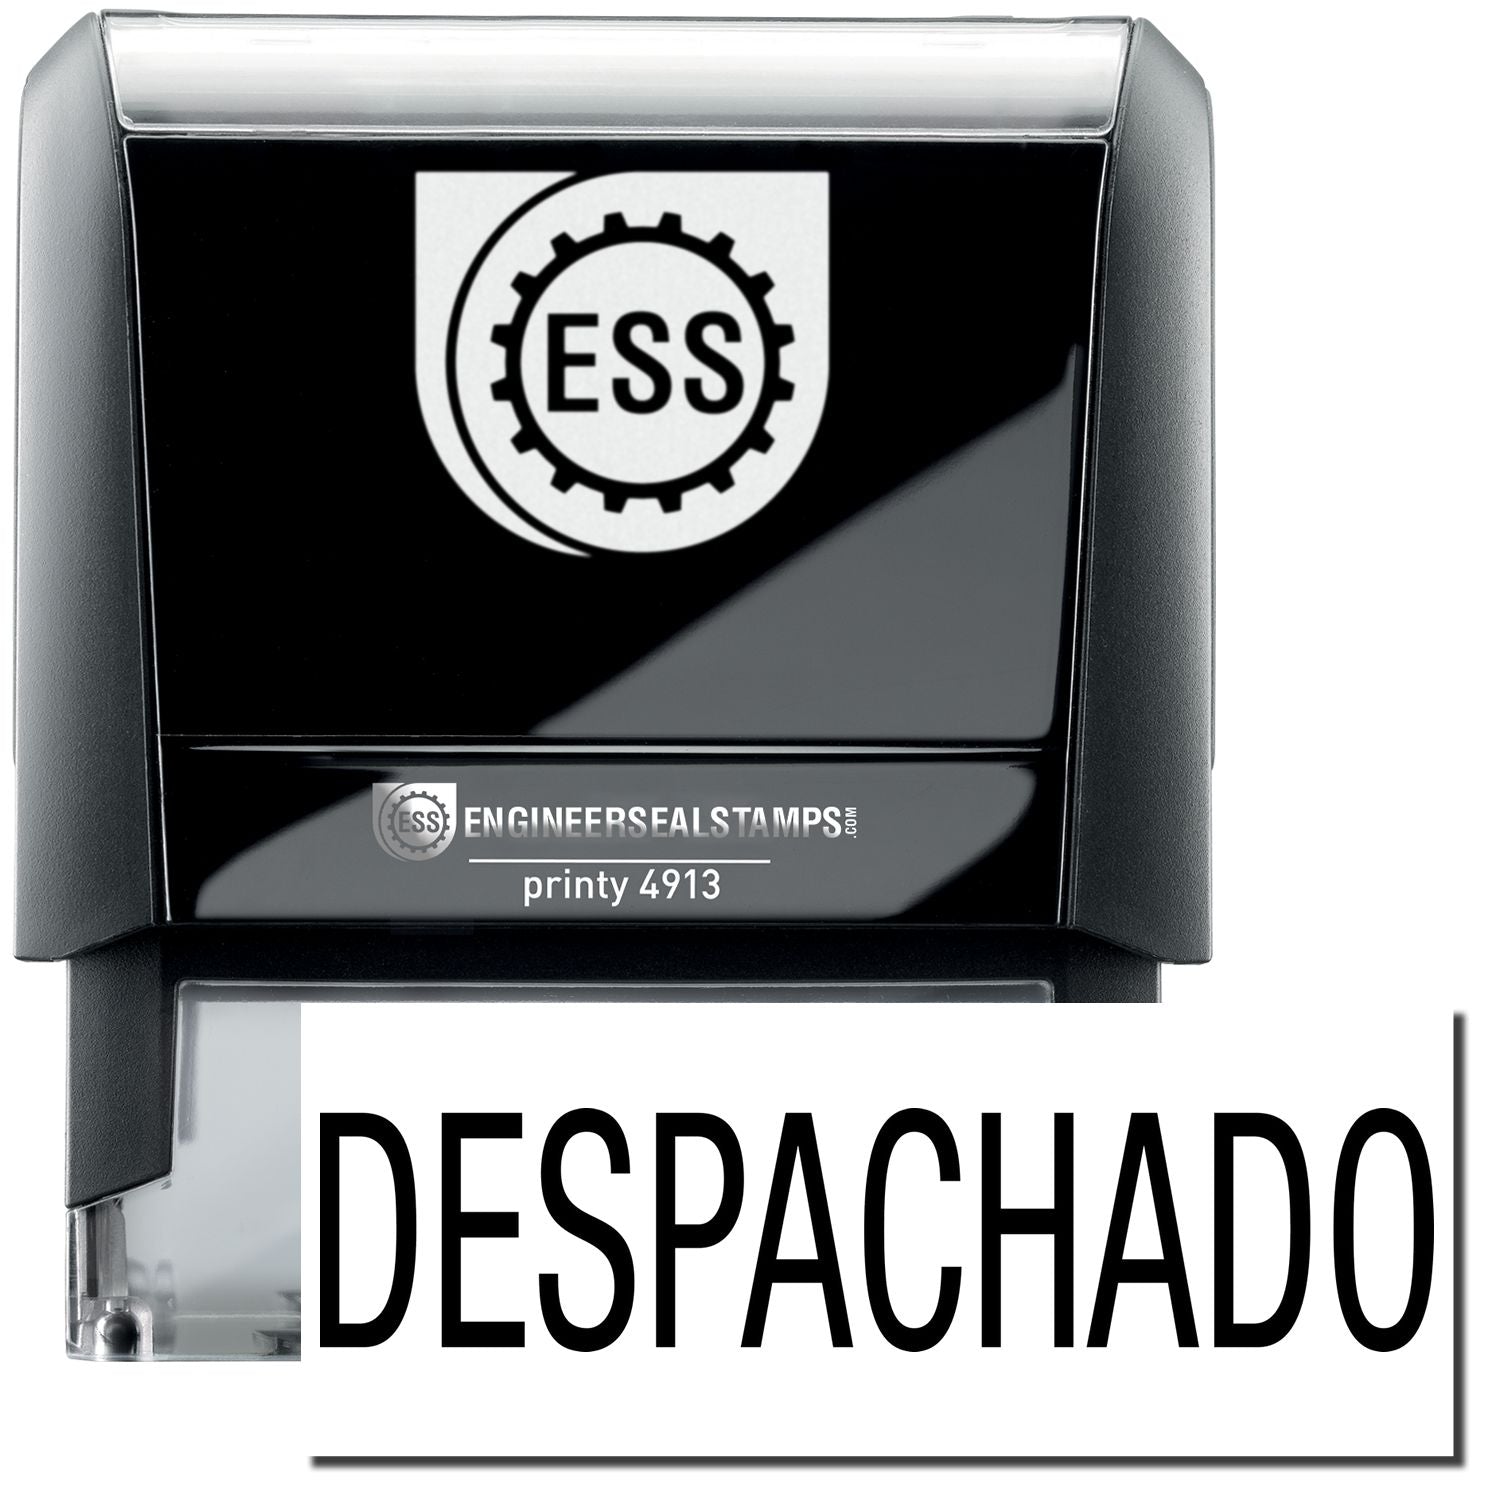 A self-inking stamp with a stamped image showing how the text "DESPACHADO" in a large font is displayed by it after stamping.